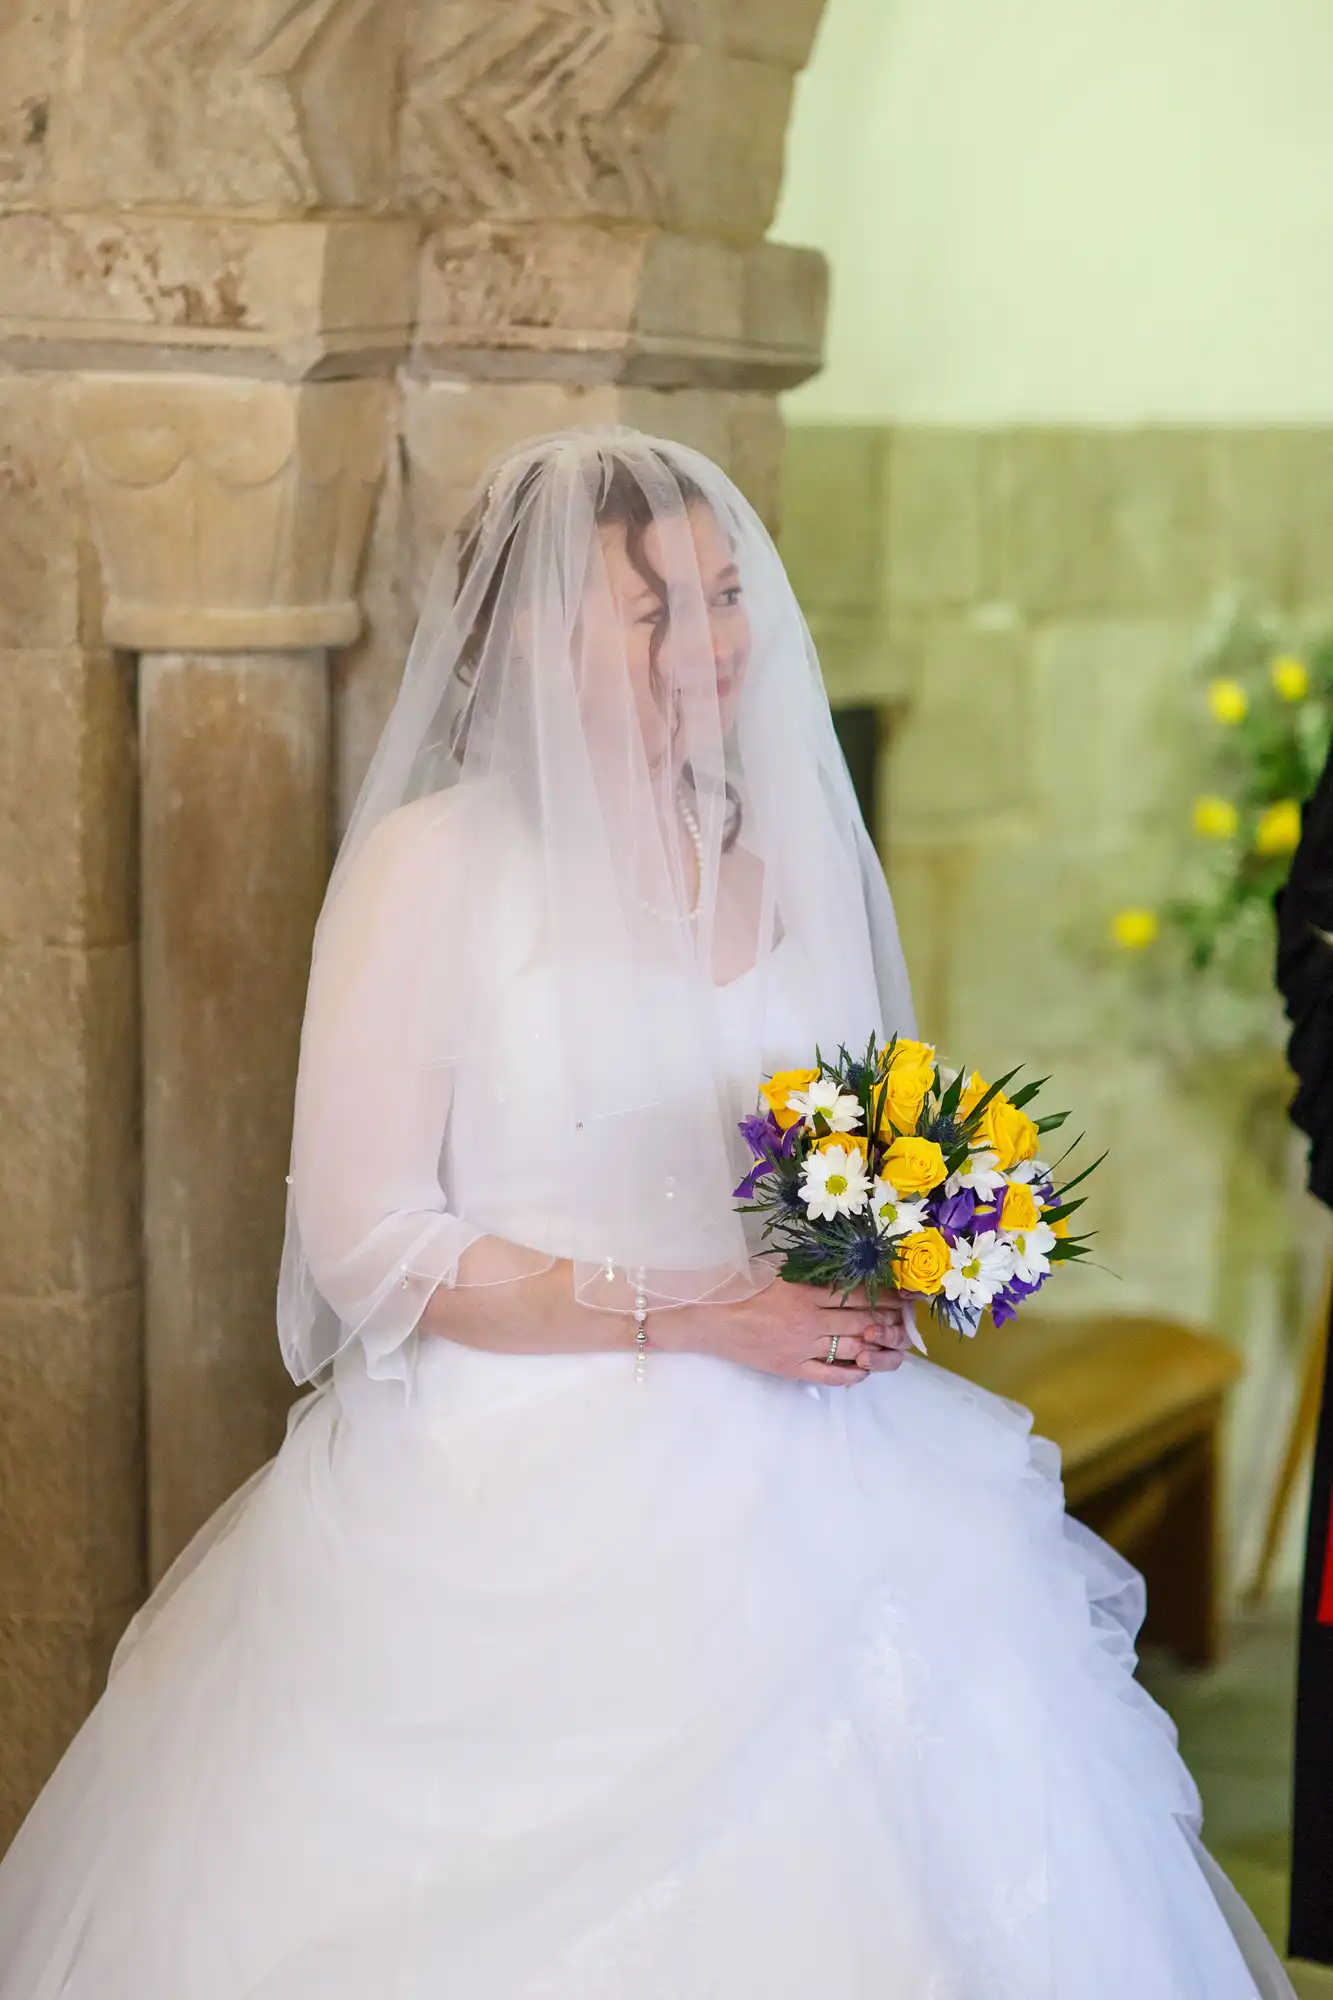 A bride in a white dress and veil holding a bouquet of yellow and purple flowers, smiling softly inside a church.